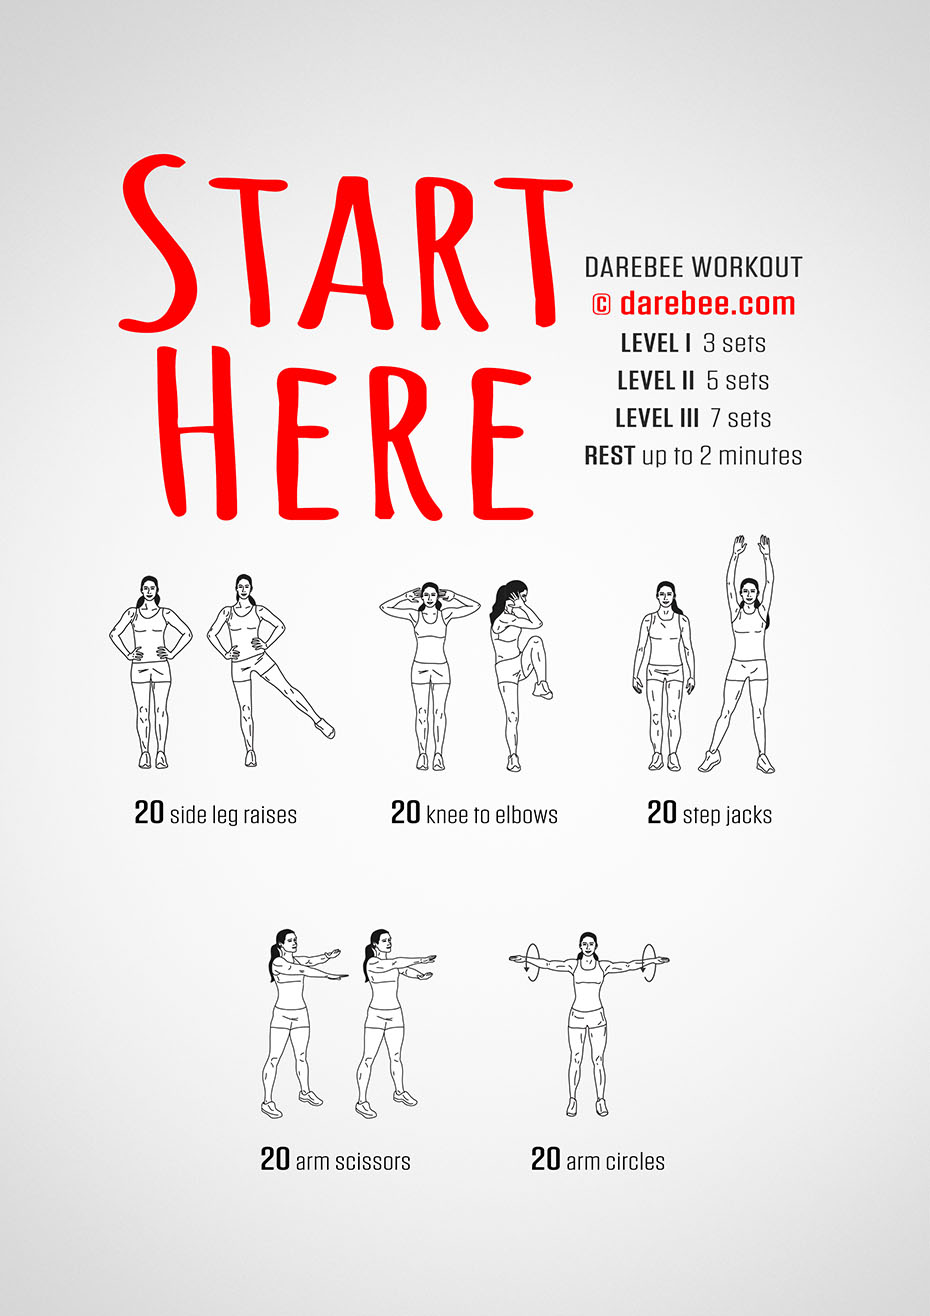 Darebee basic home fitness exercises workout